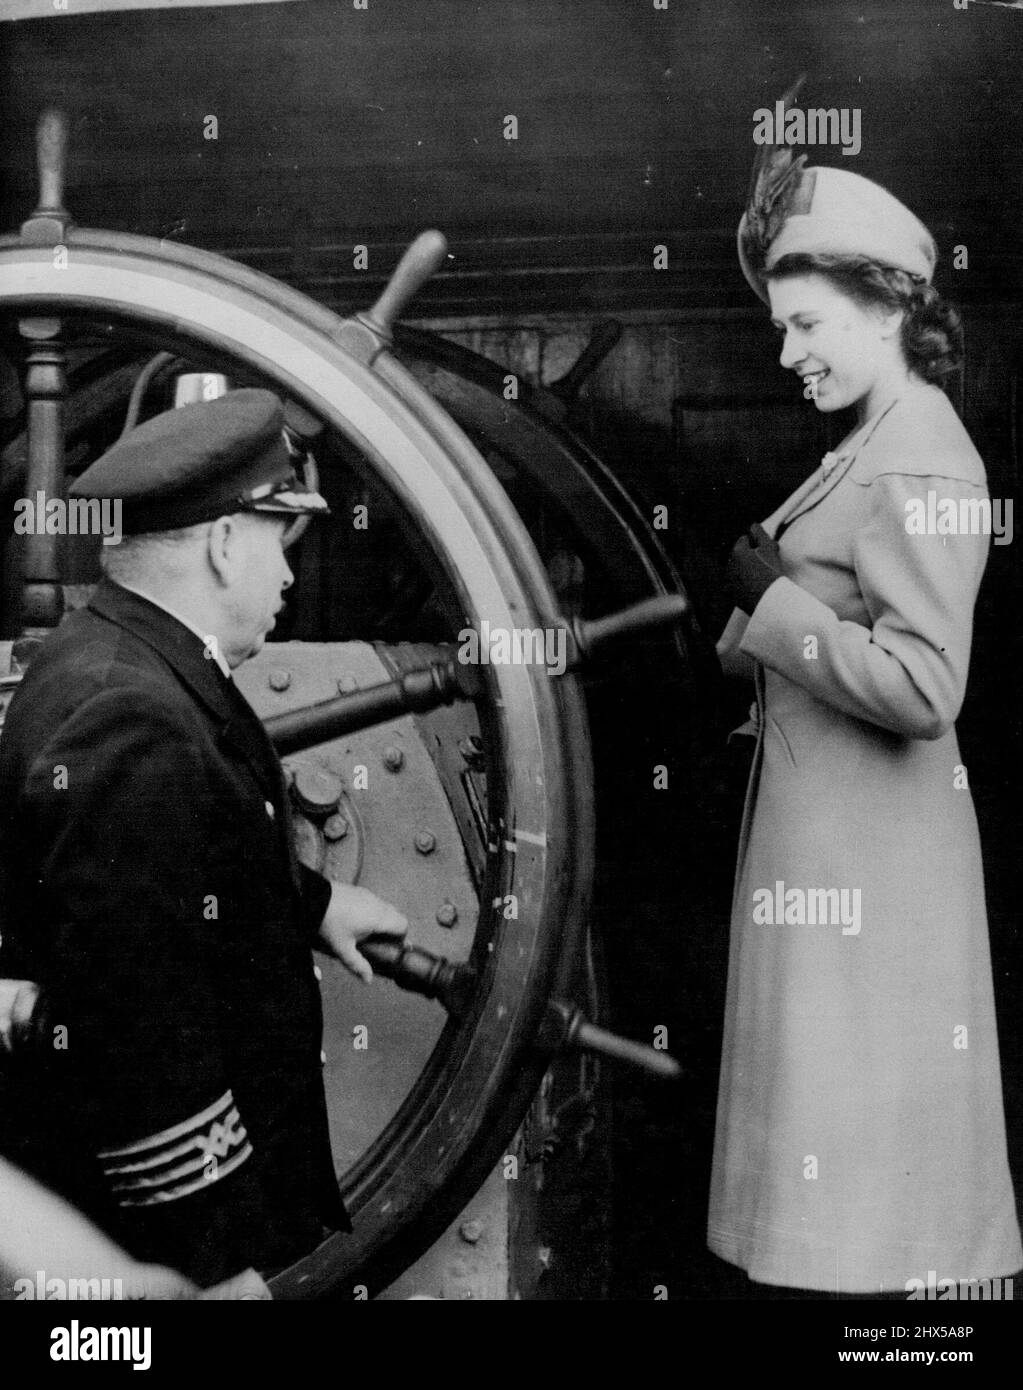 Princess Takes The Wheel - H.R.H. Princess Elizabeth takes a close look at the great steering wheel of the New Zealand four masted barque Pamir, during her visit with the Duke of Edinburgh to the ship in Shadwell Basin. The ship's master Capt. H. Collier is explaining the mechanism,- to-day (Wednesday). March 3, 1948. (Photo by Reuterphoto). Stock Photo